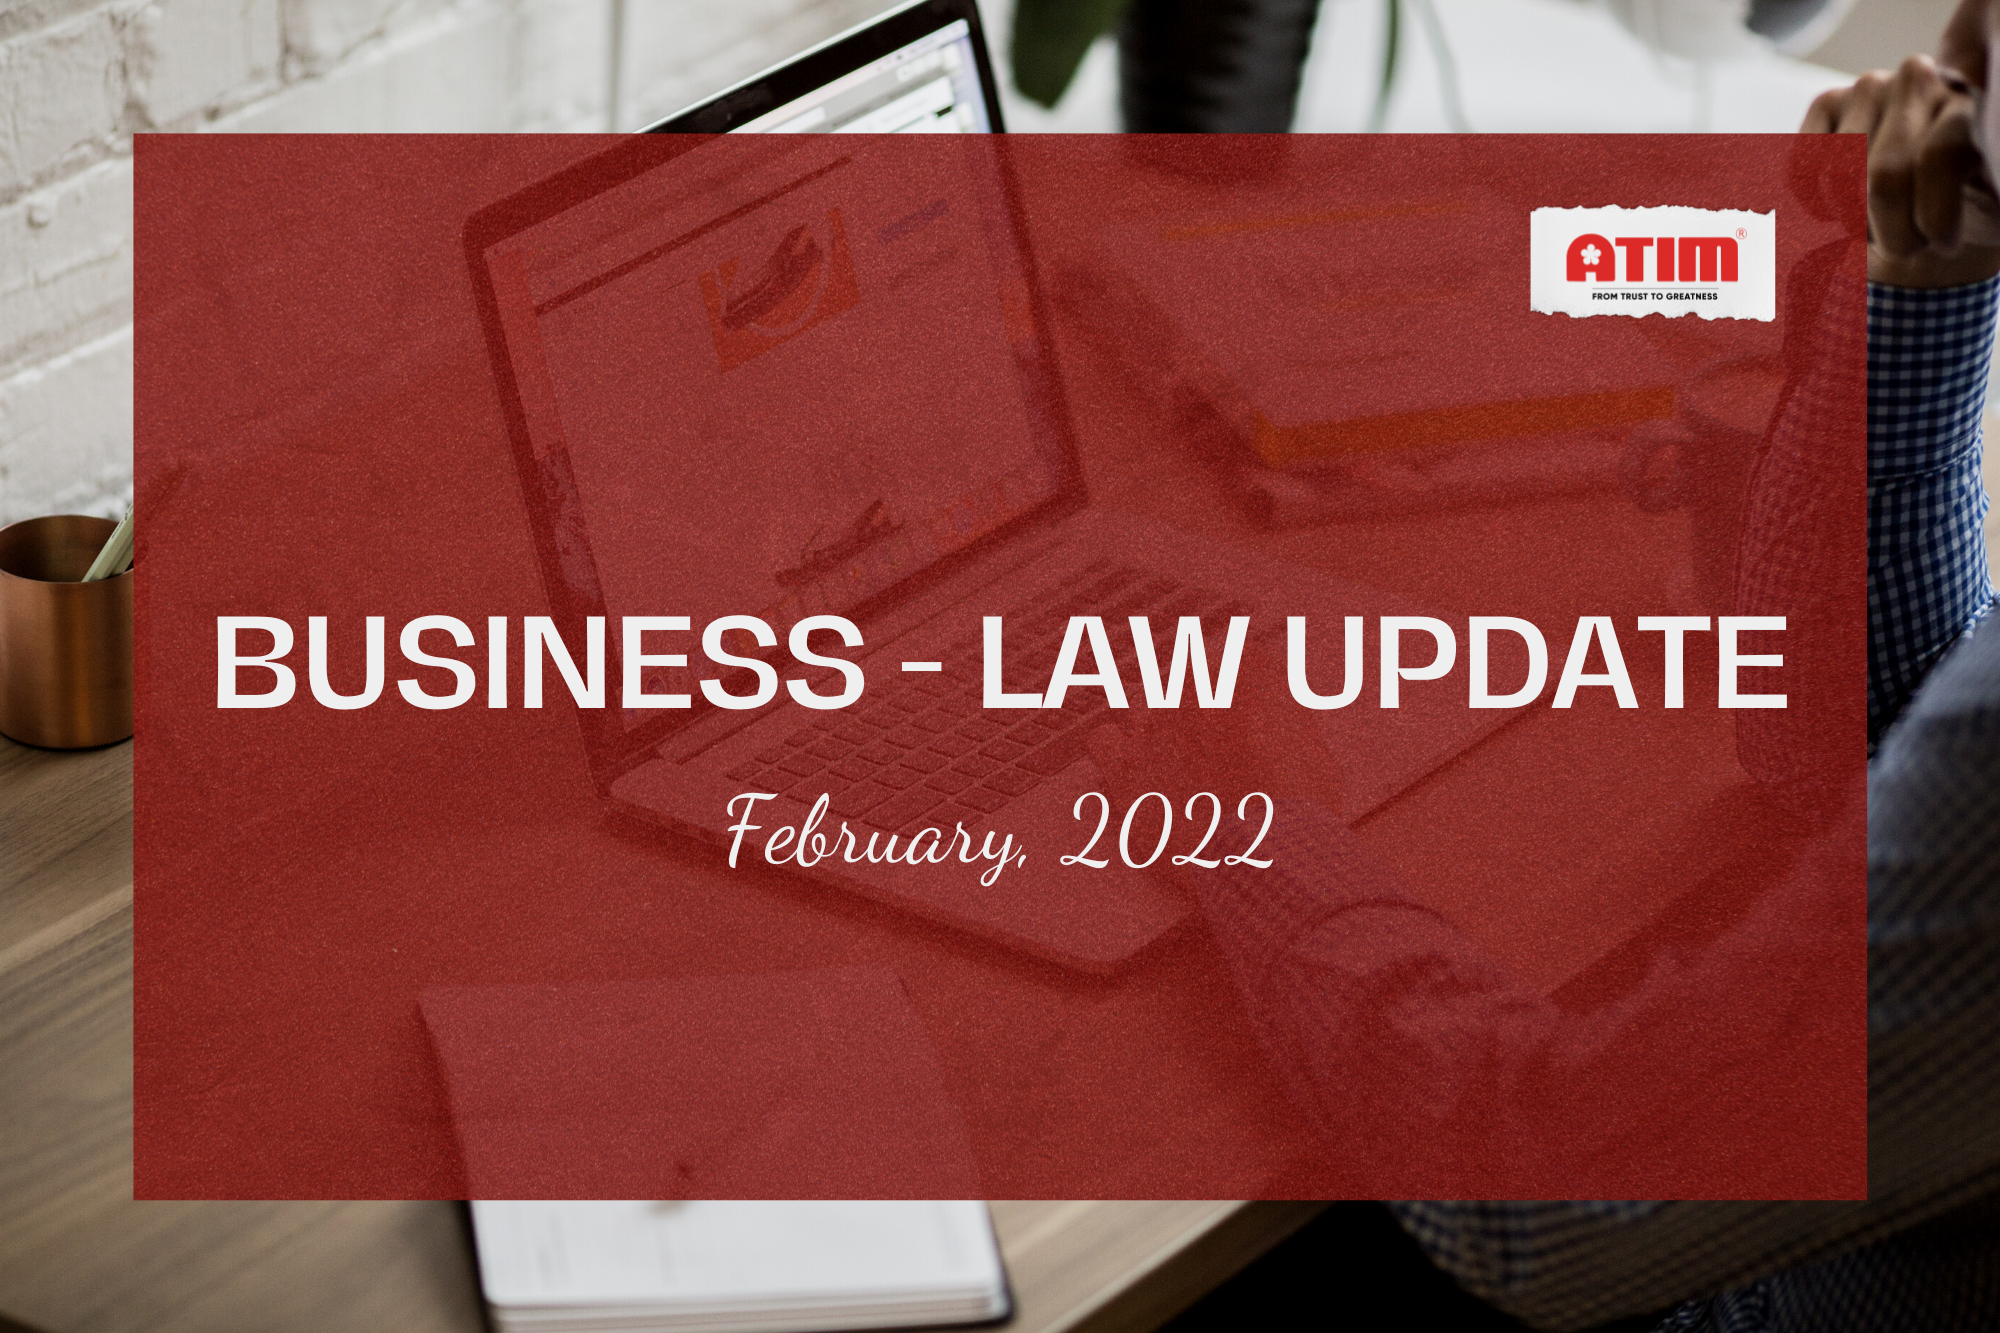 BUSINESS LAW UPDATE - FEBRUARY 2022